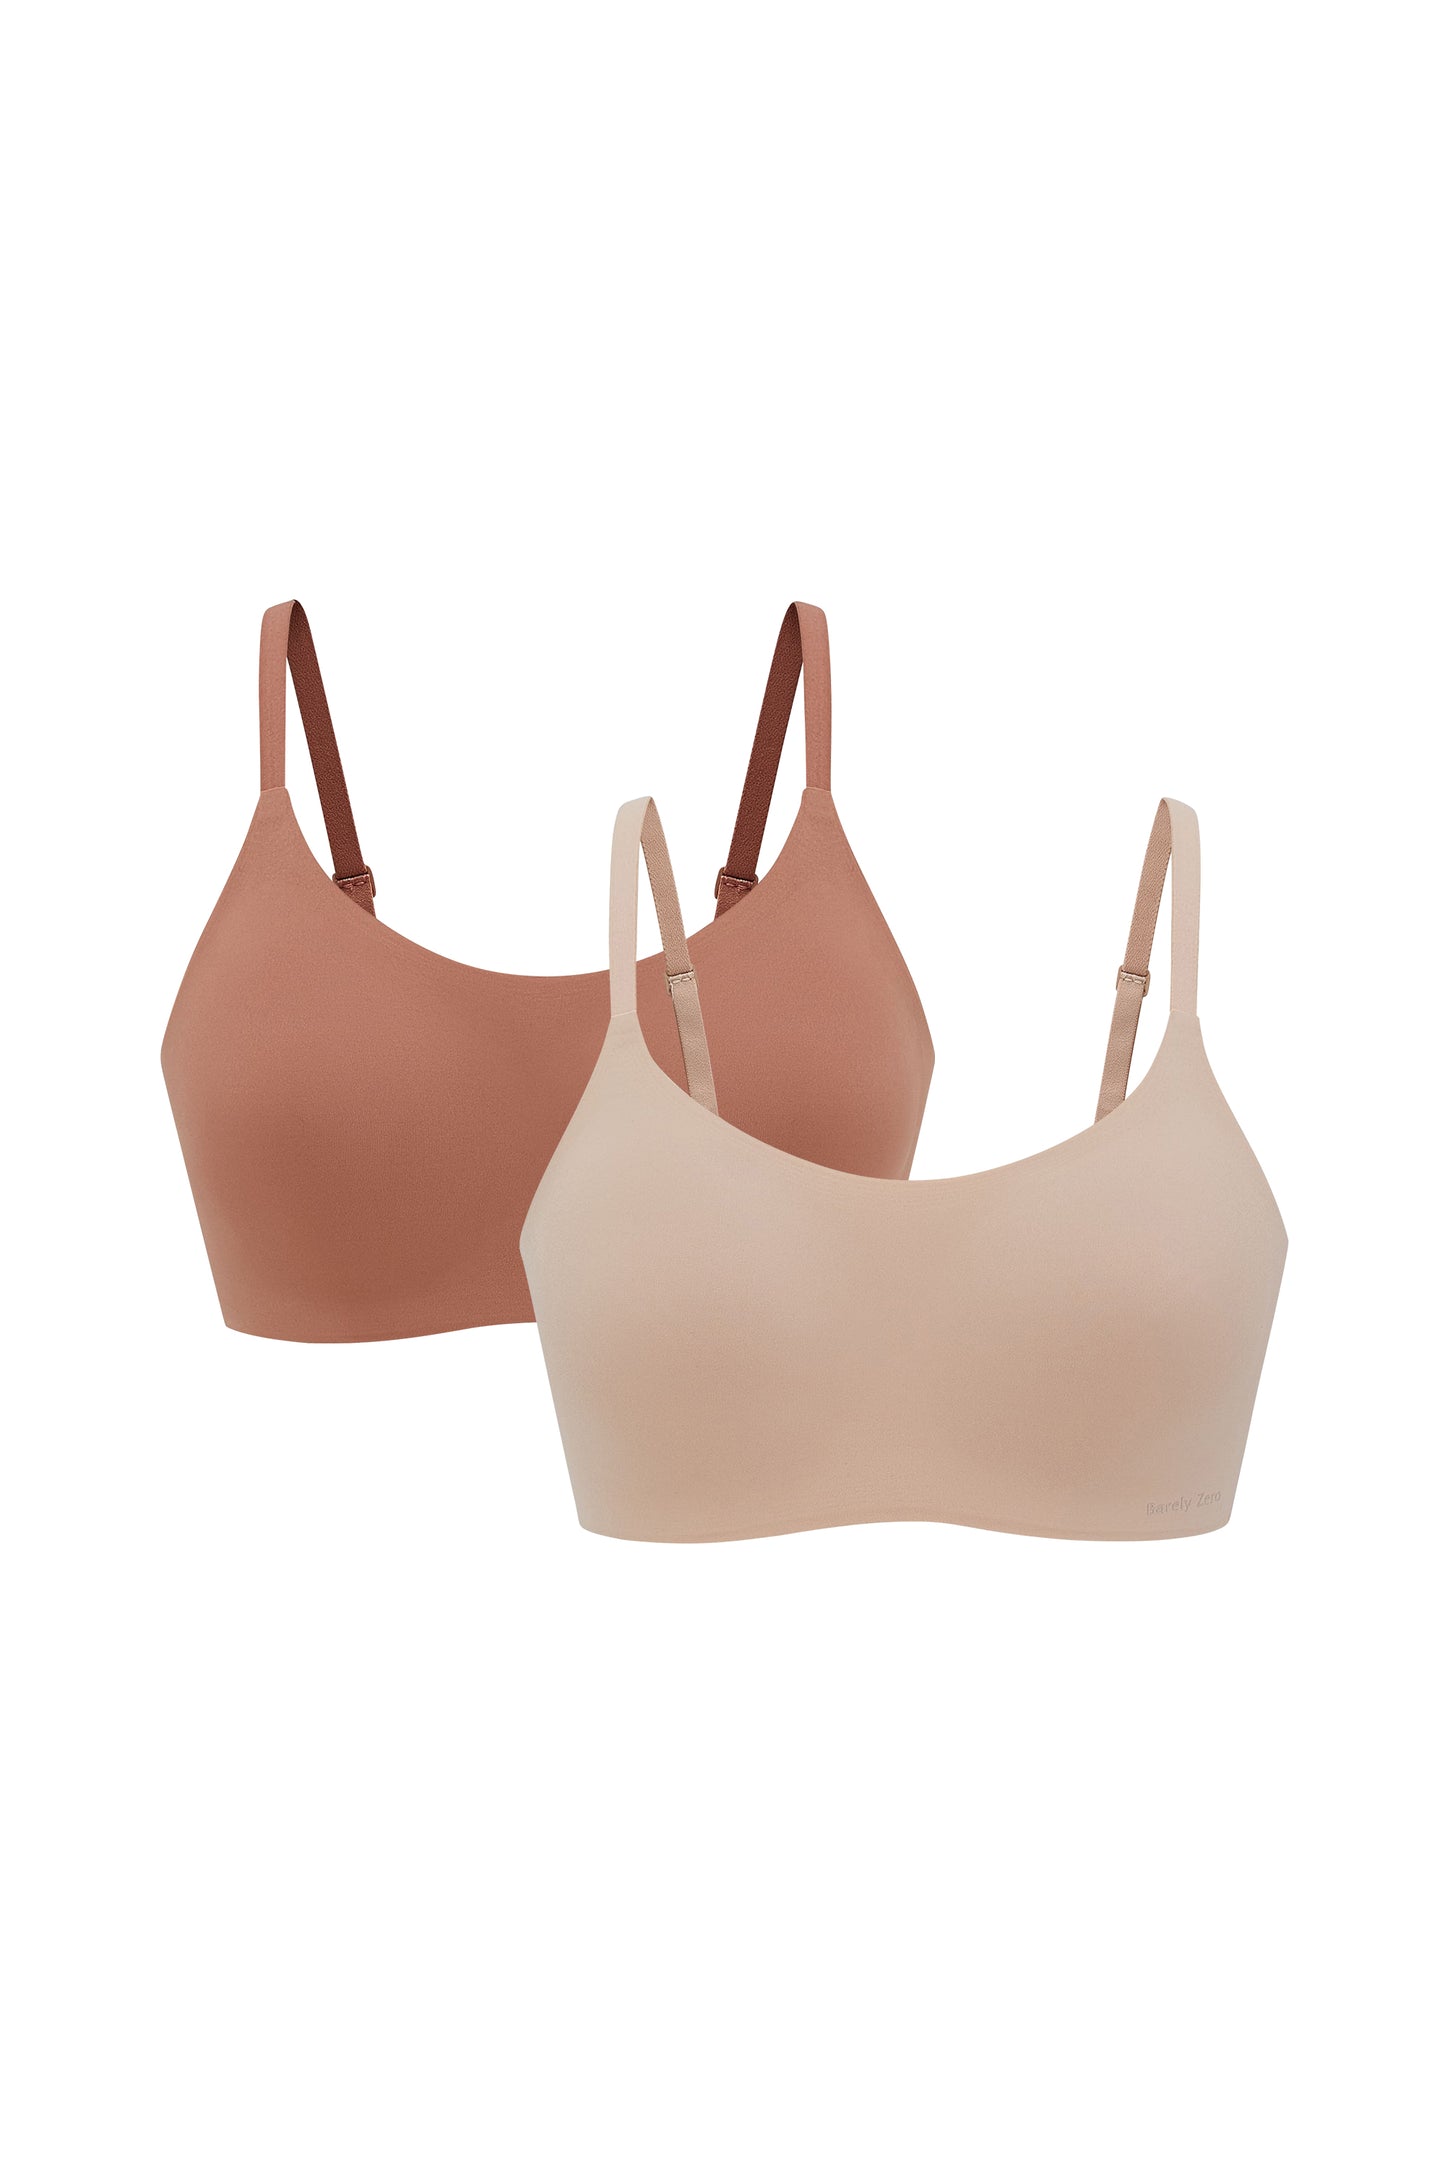 two bras in rust color and beige